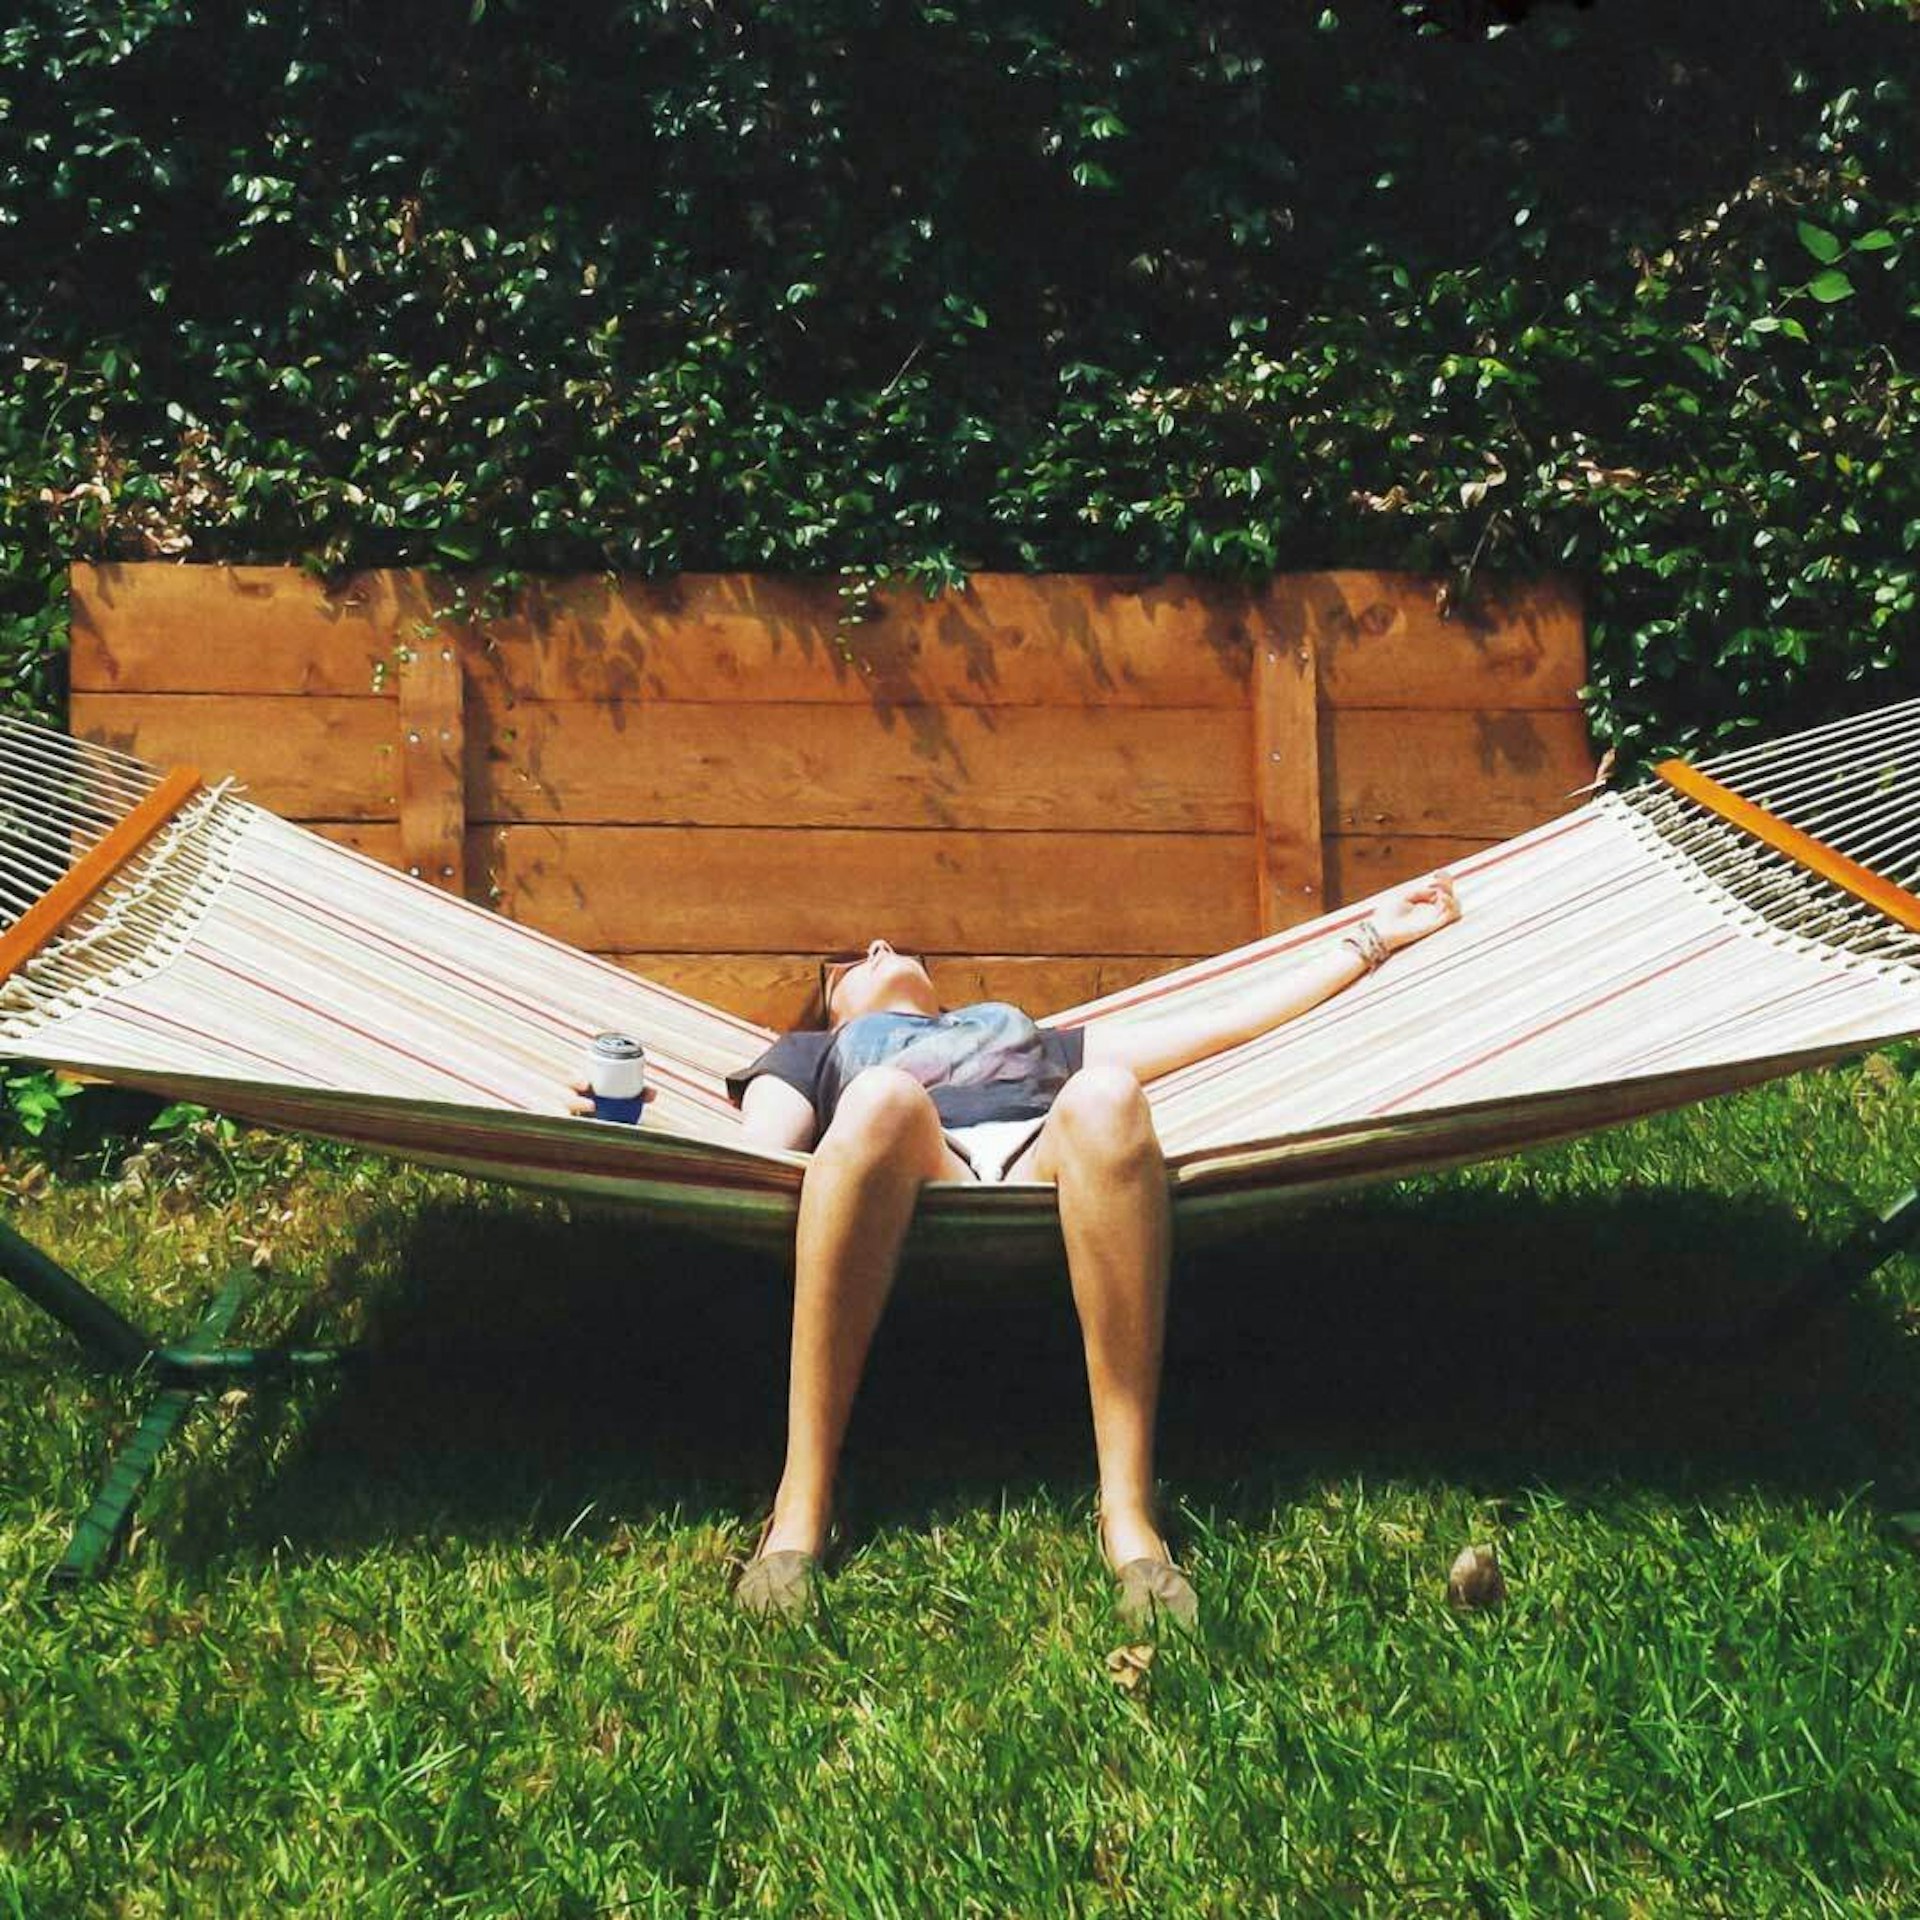 A person lies back on a hammock.